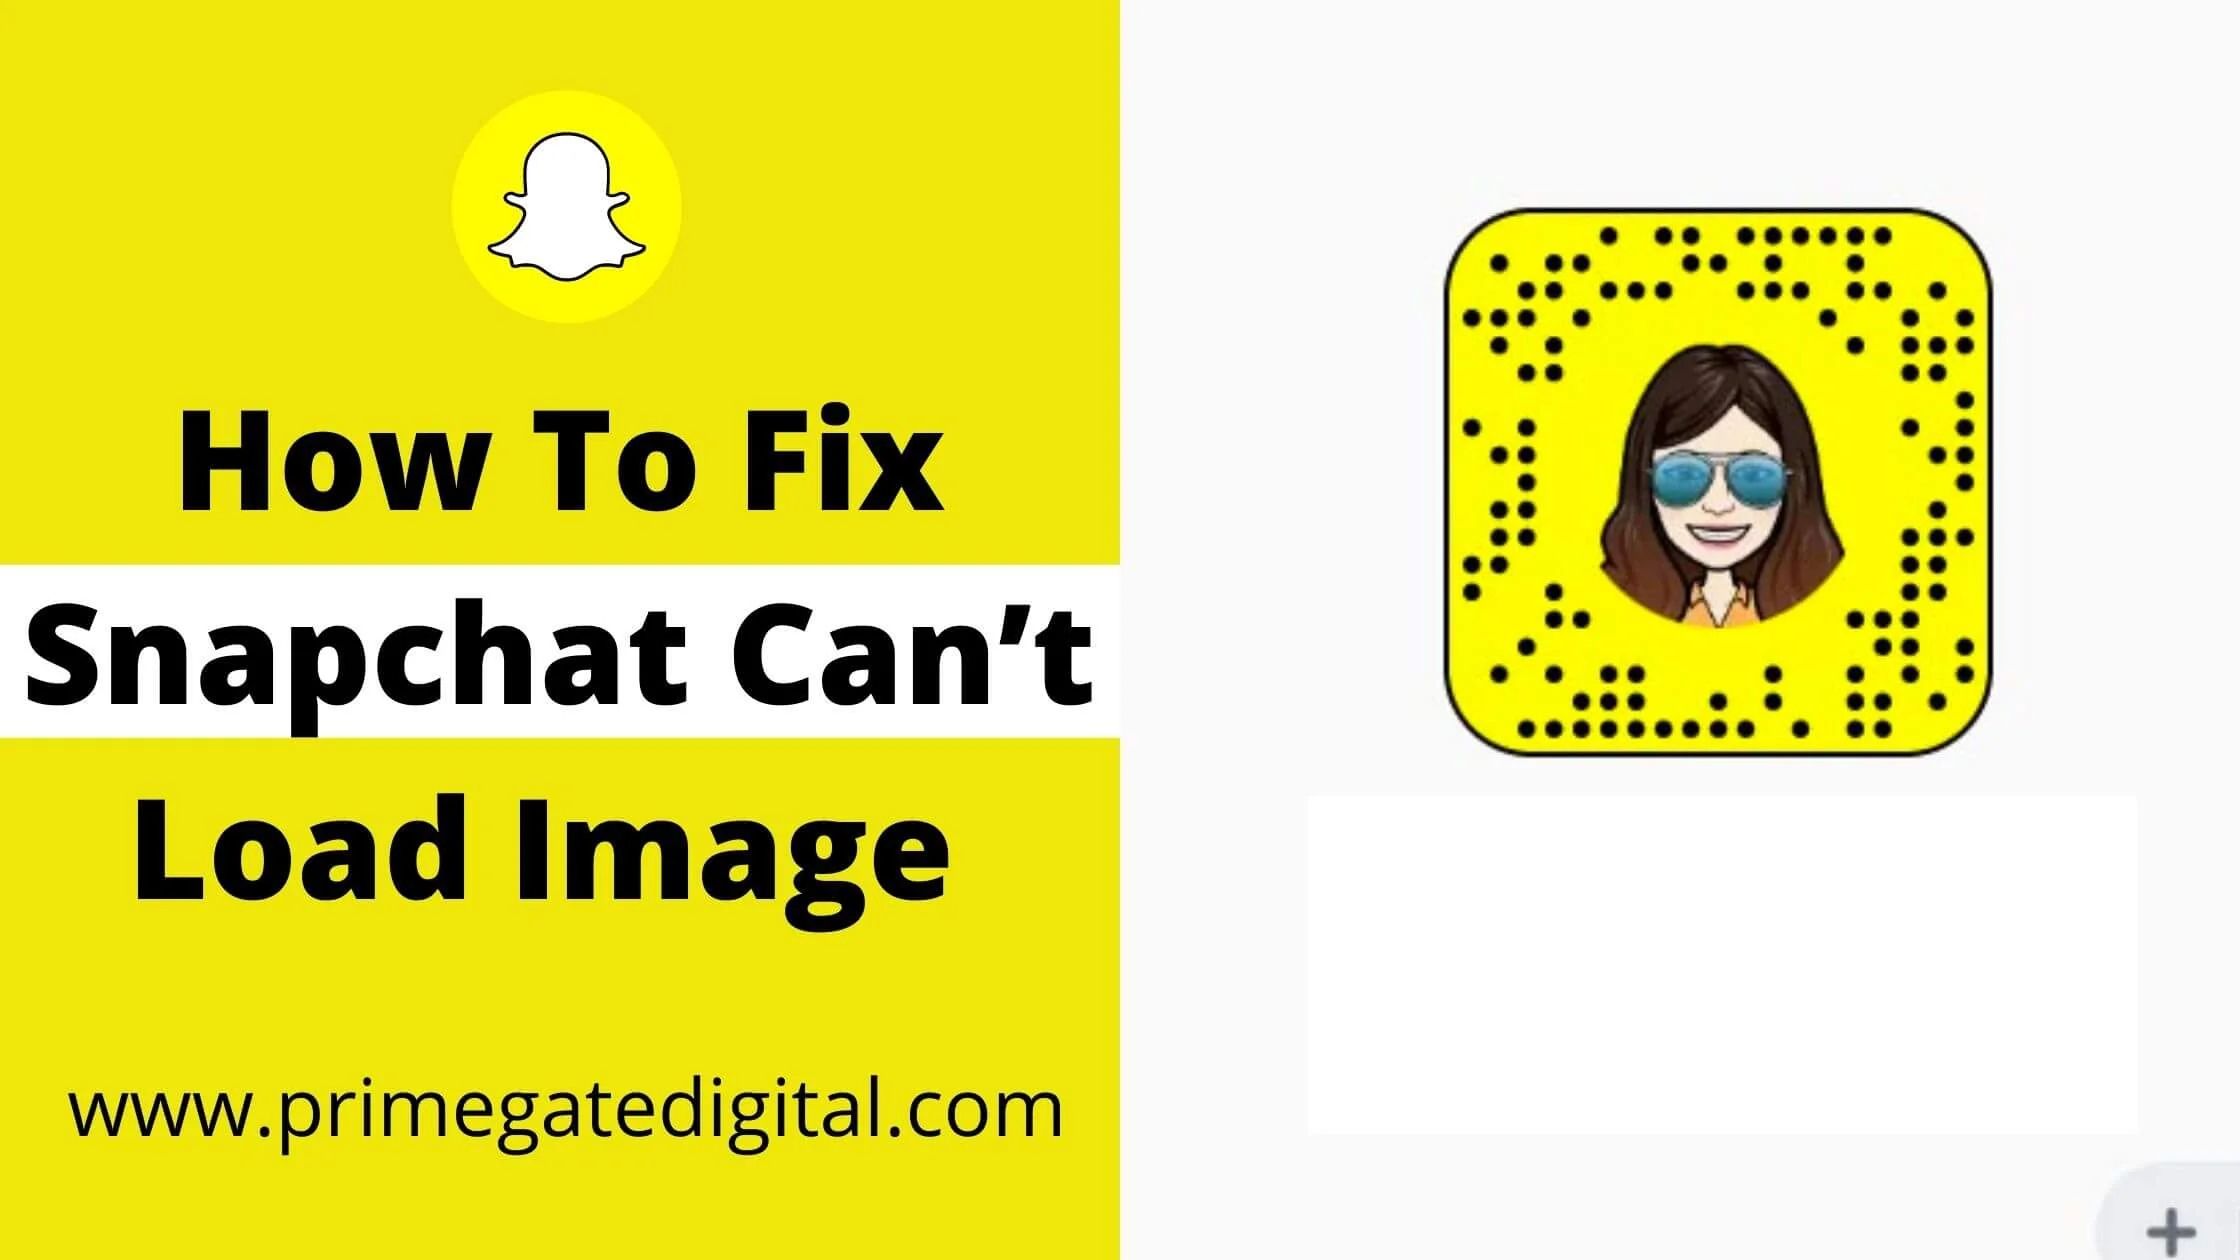 How To Fix Snapchat Can’t Load Image